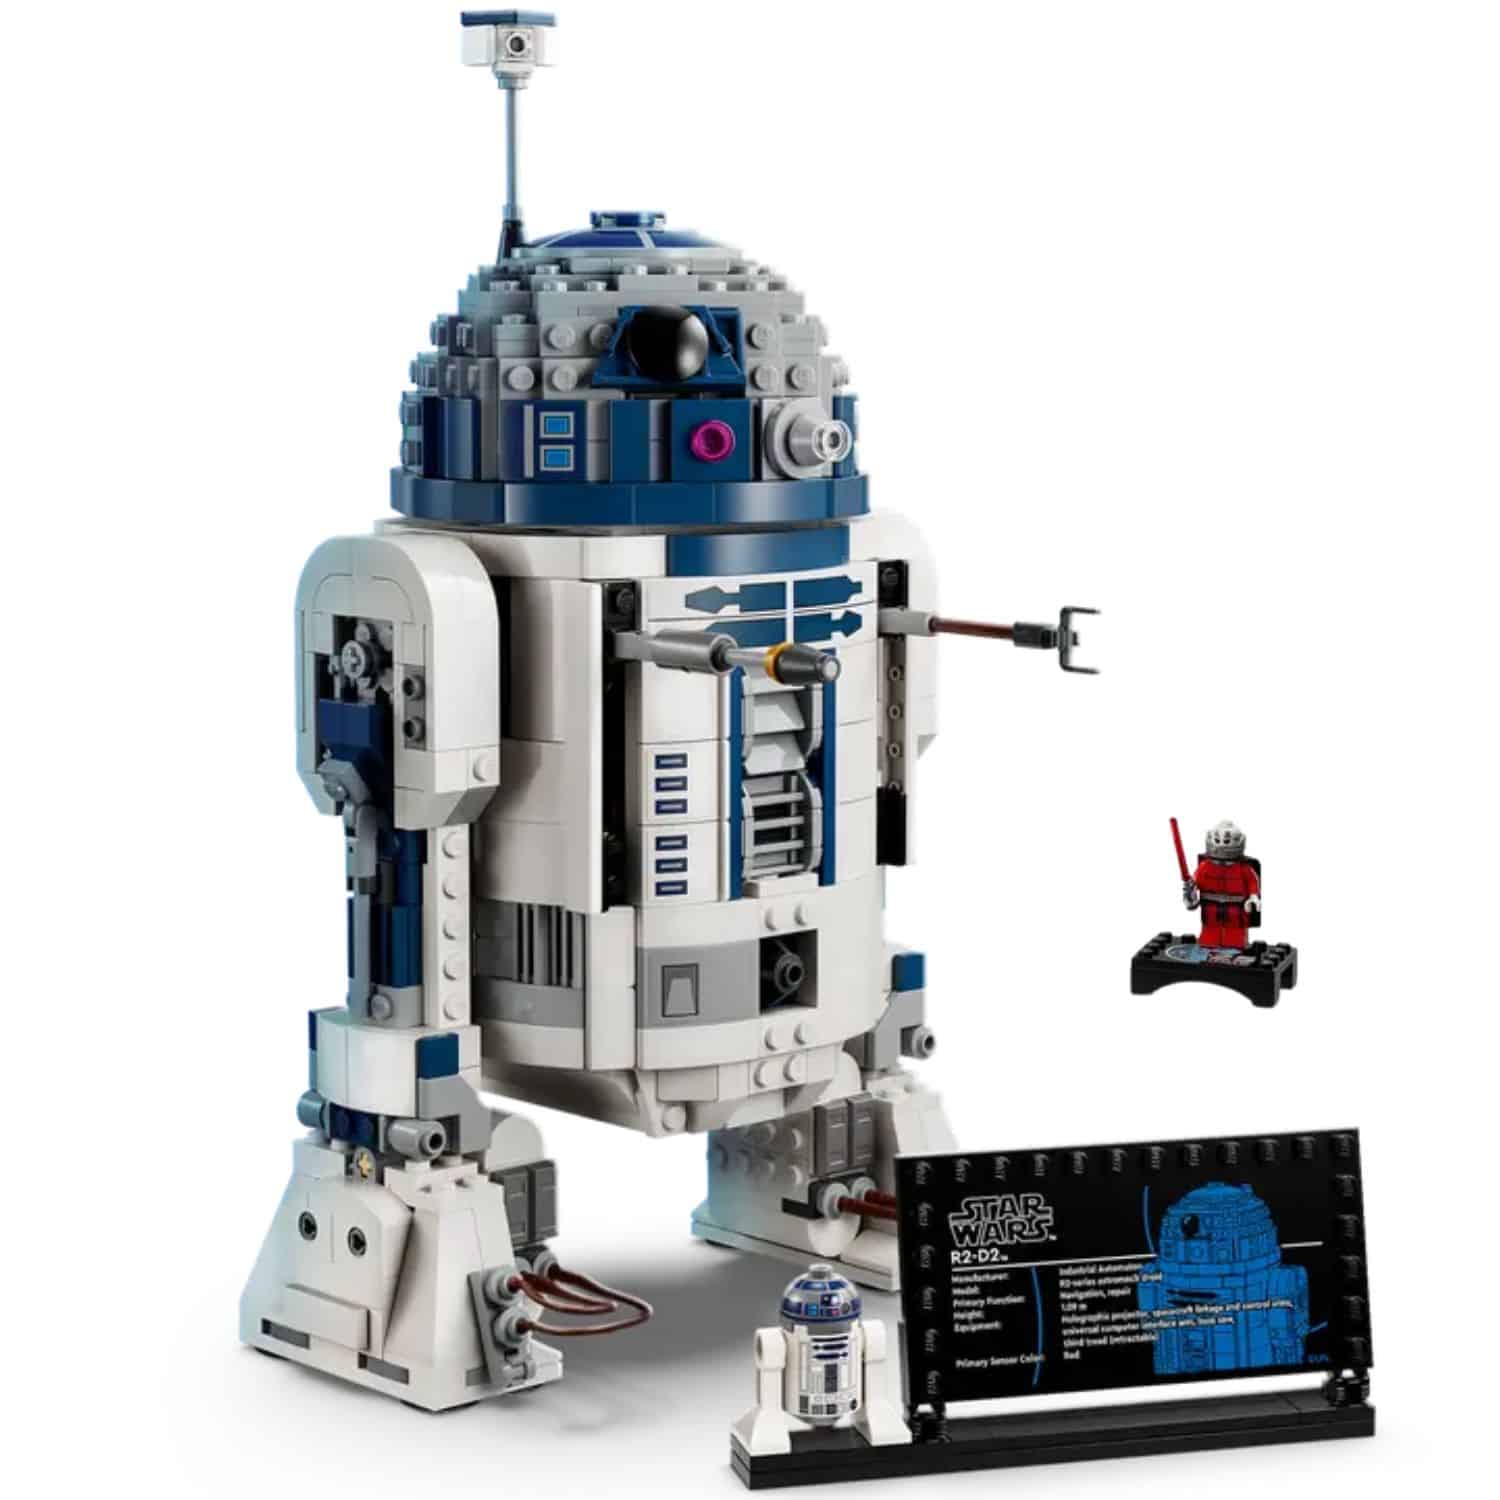 LEGO Star Wars R2-D2 with Exclusive Darth Malak minifigure